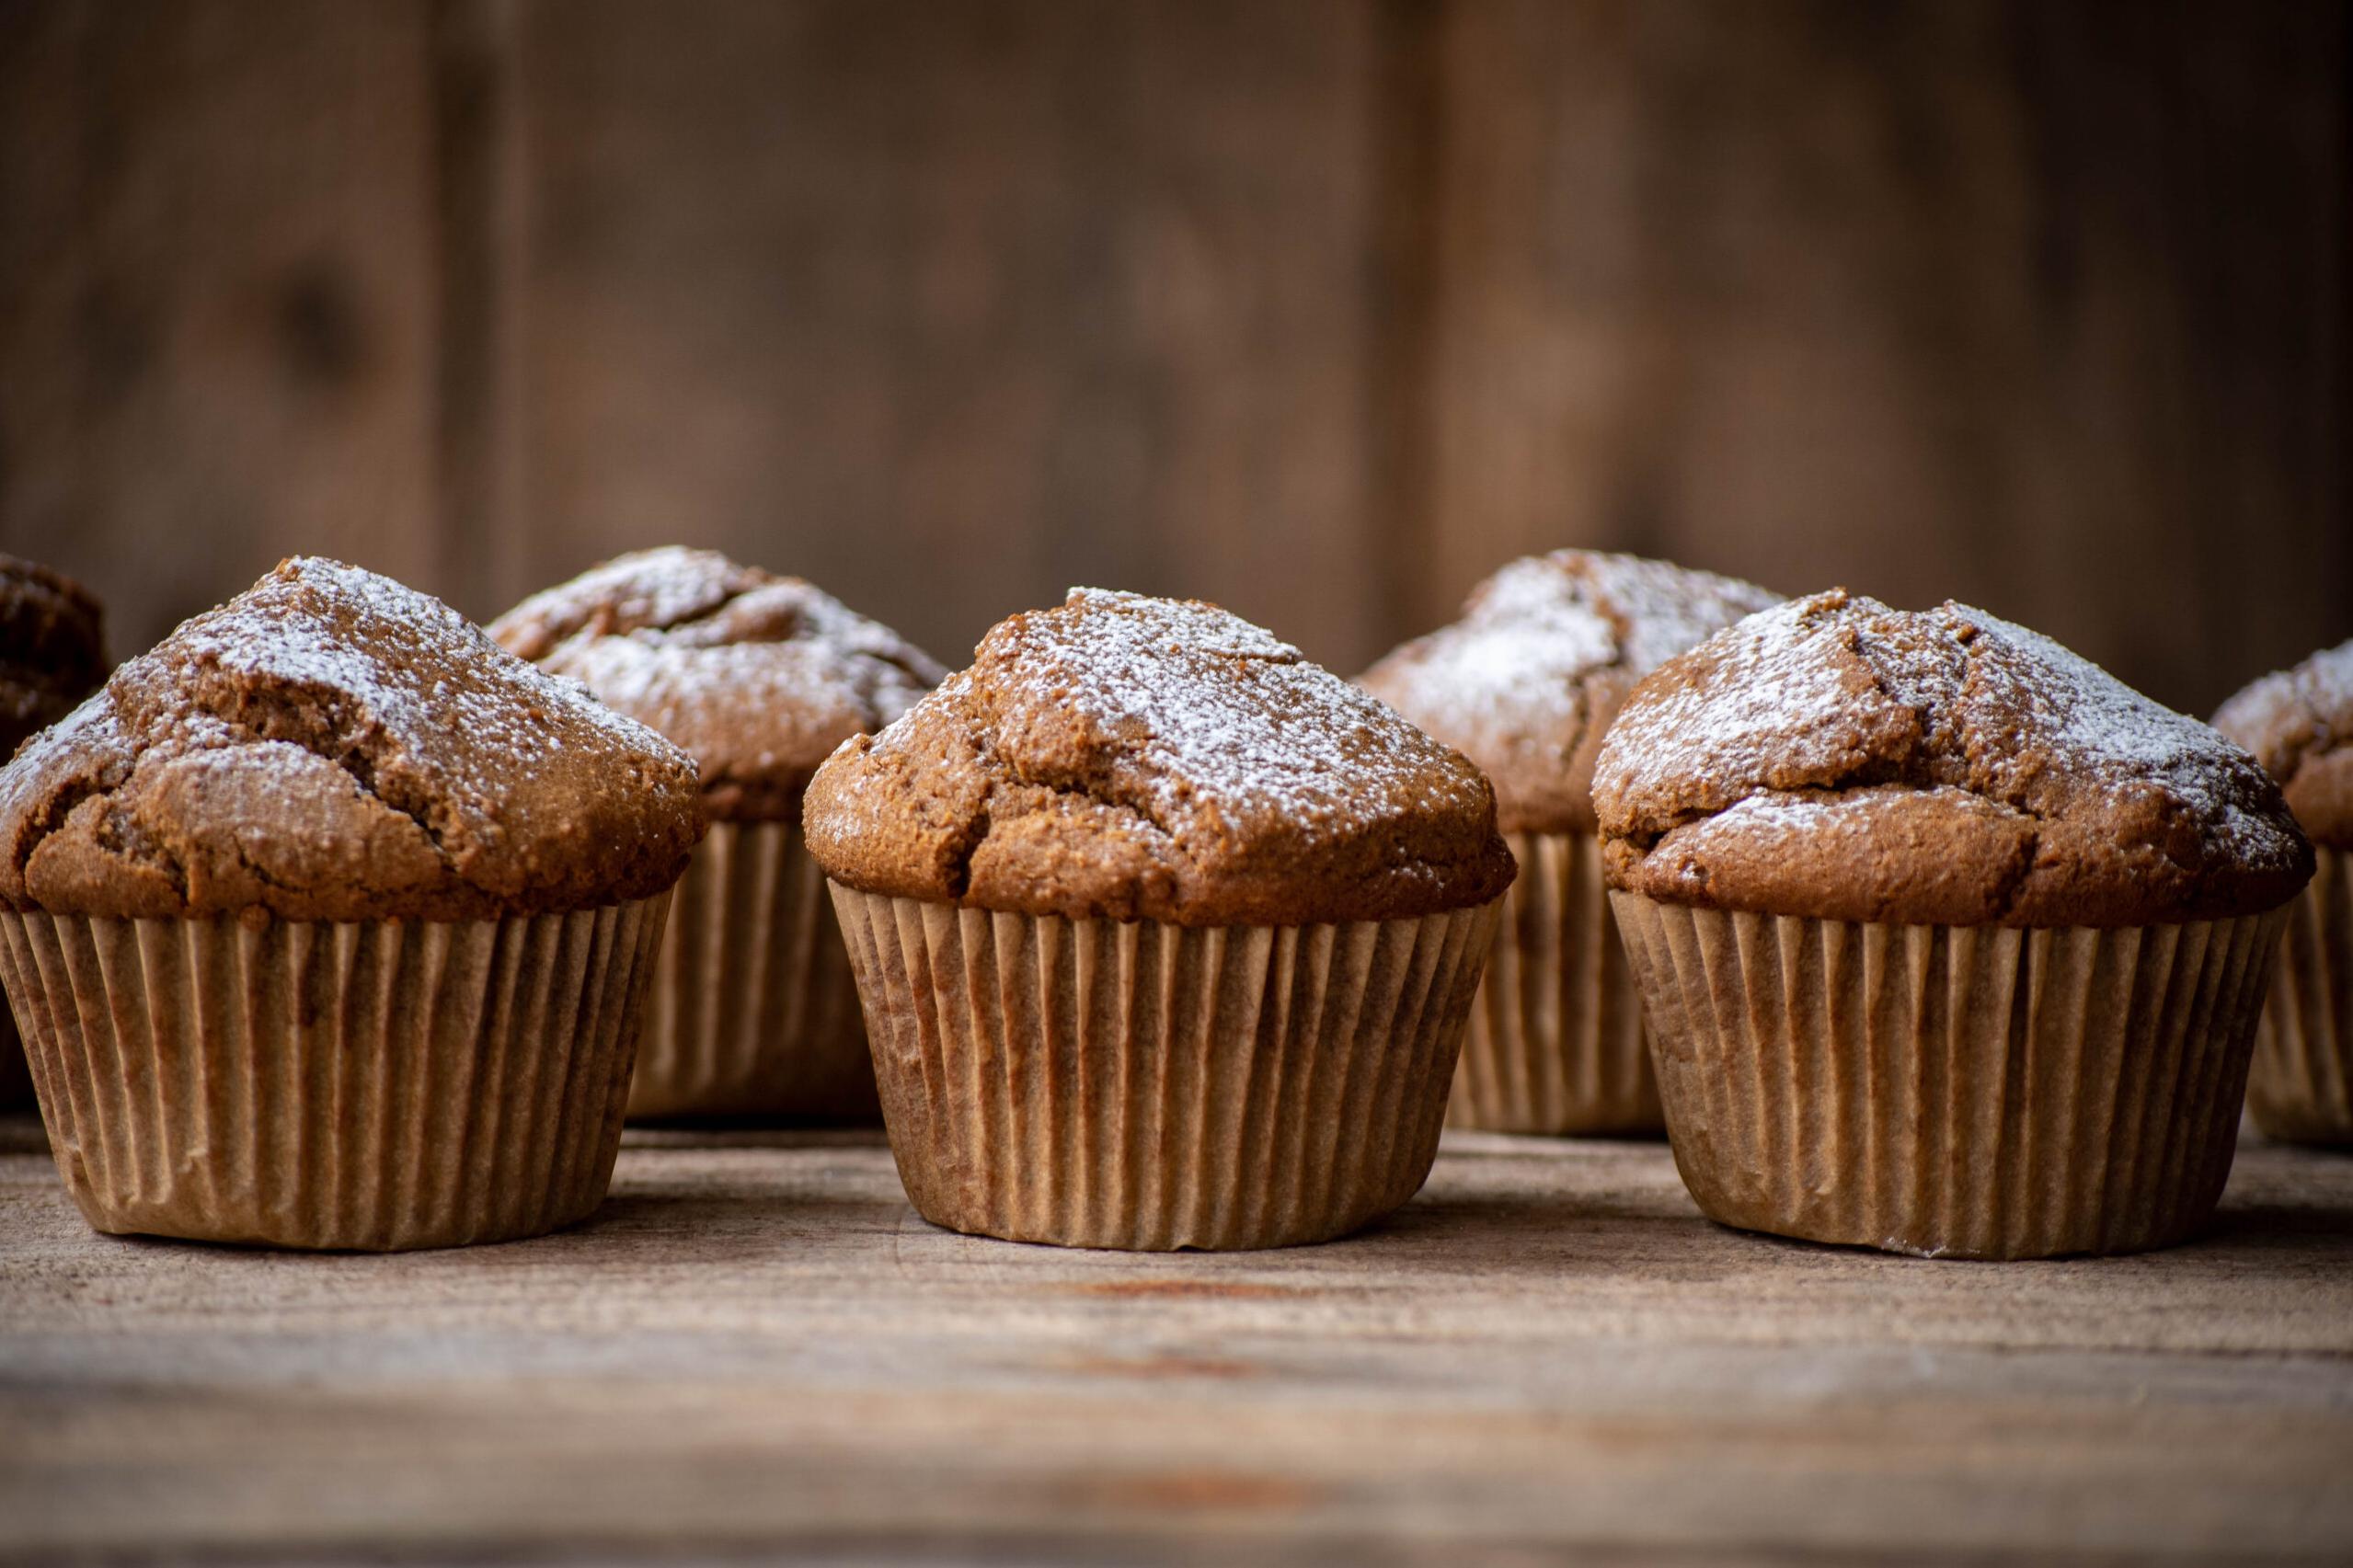  Make your kitchen smell amazing with these gingerbread muffins.